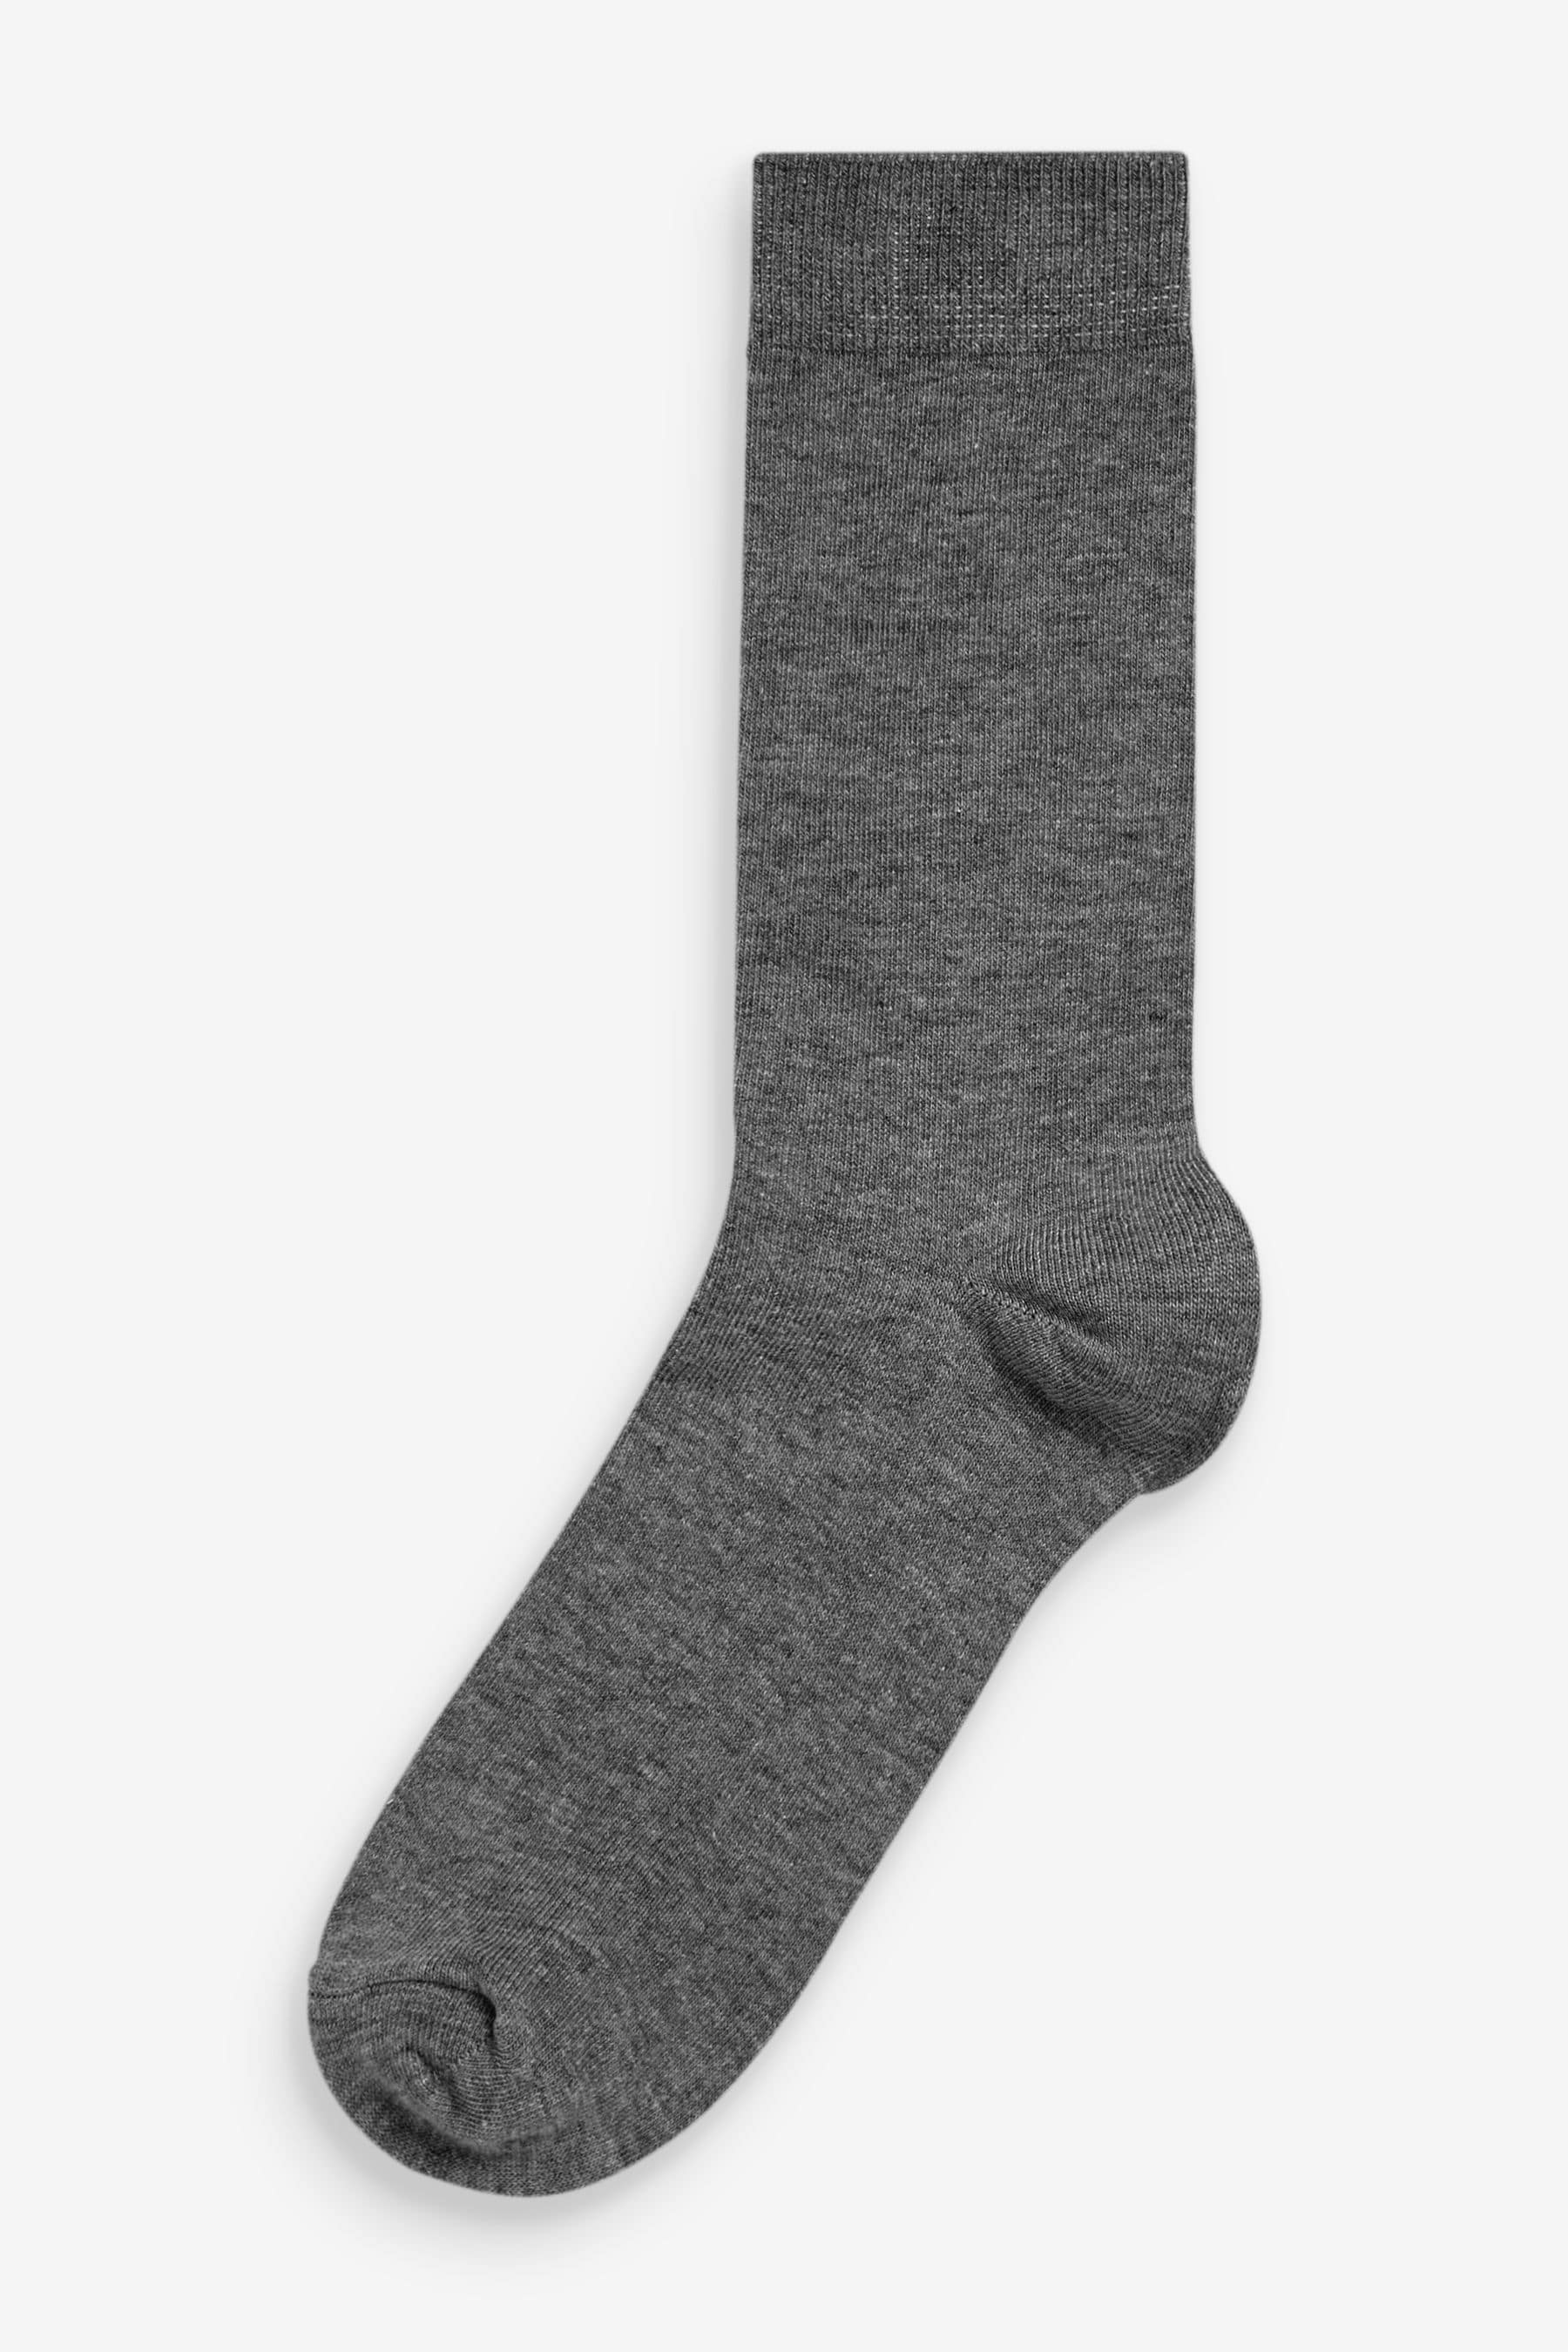 Buy Mens Cotton Rich Socks from the Next UK online shop